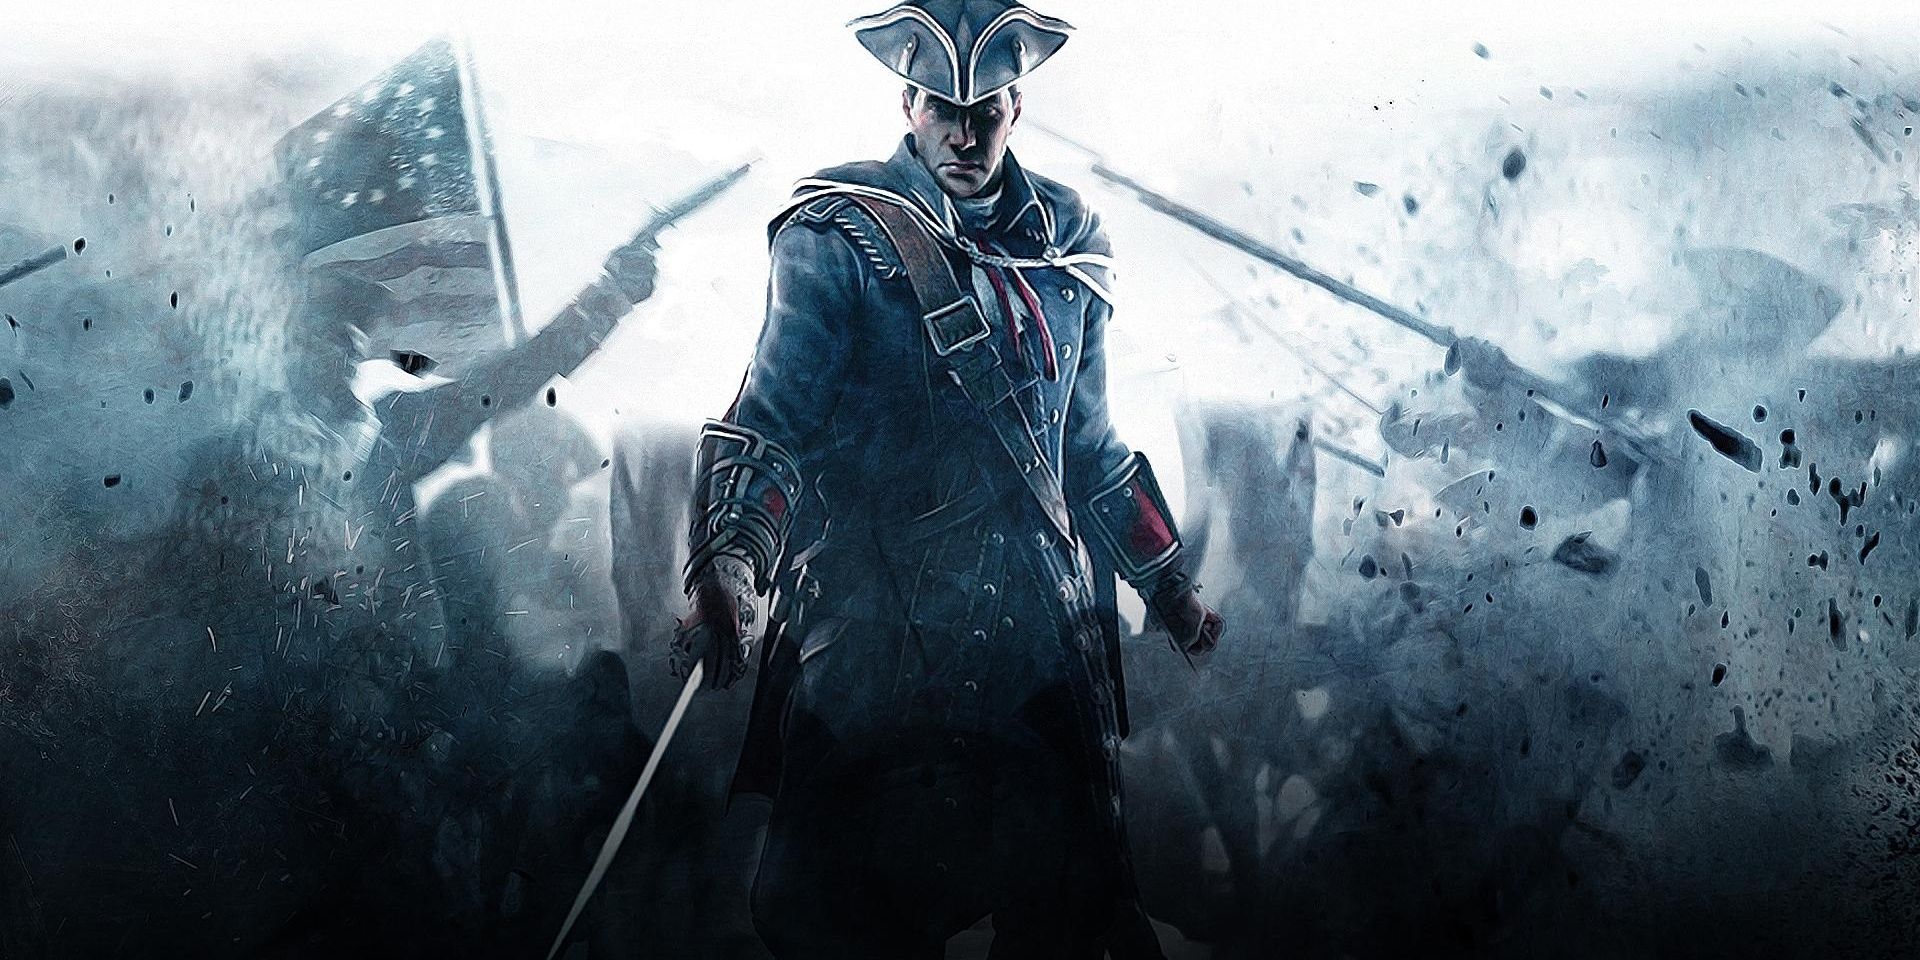 Haytham Kenway stands in a battlefield in Assassin's Creed 3.